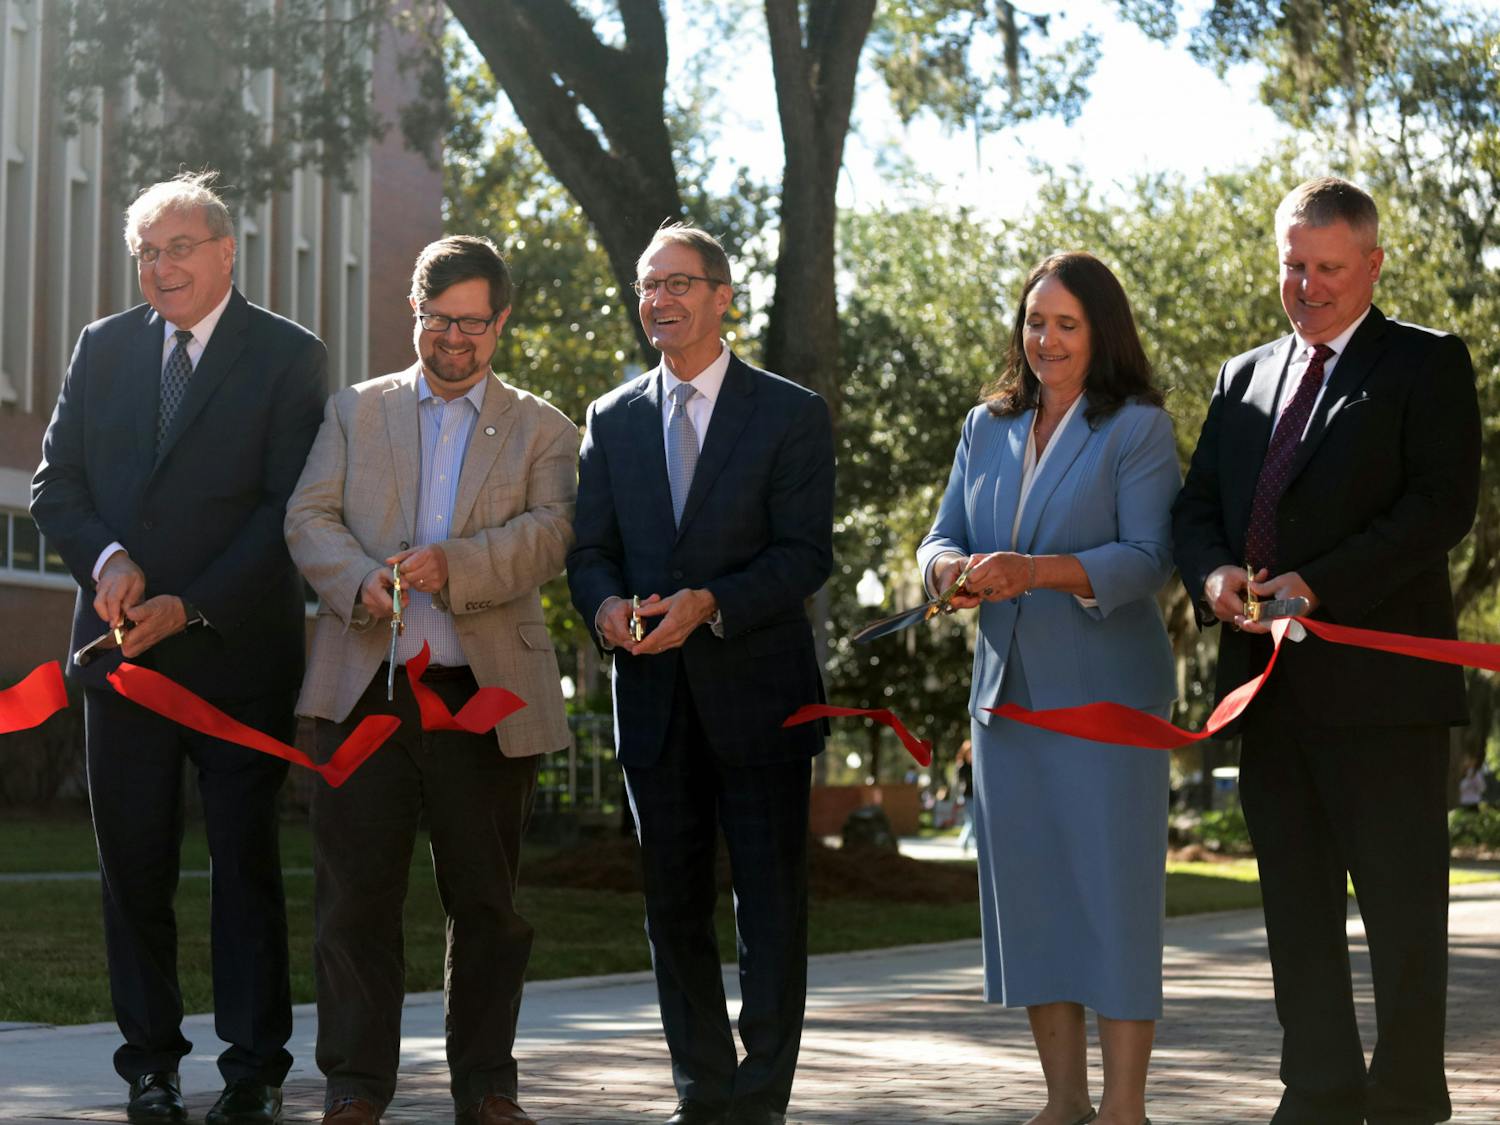 UF President Kent Fuchs, Mayor Lauren Poe and other contributors cut the ribbon at the Newell Gateway Ribbon Cutting Ceremony Wednesday, Oct. 19, 2022.